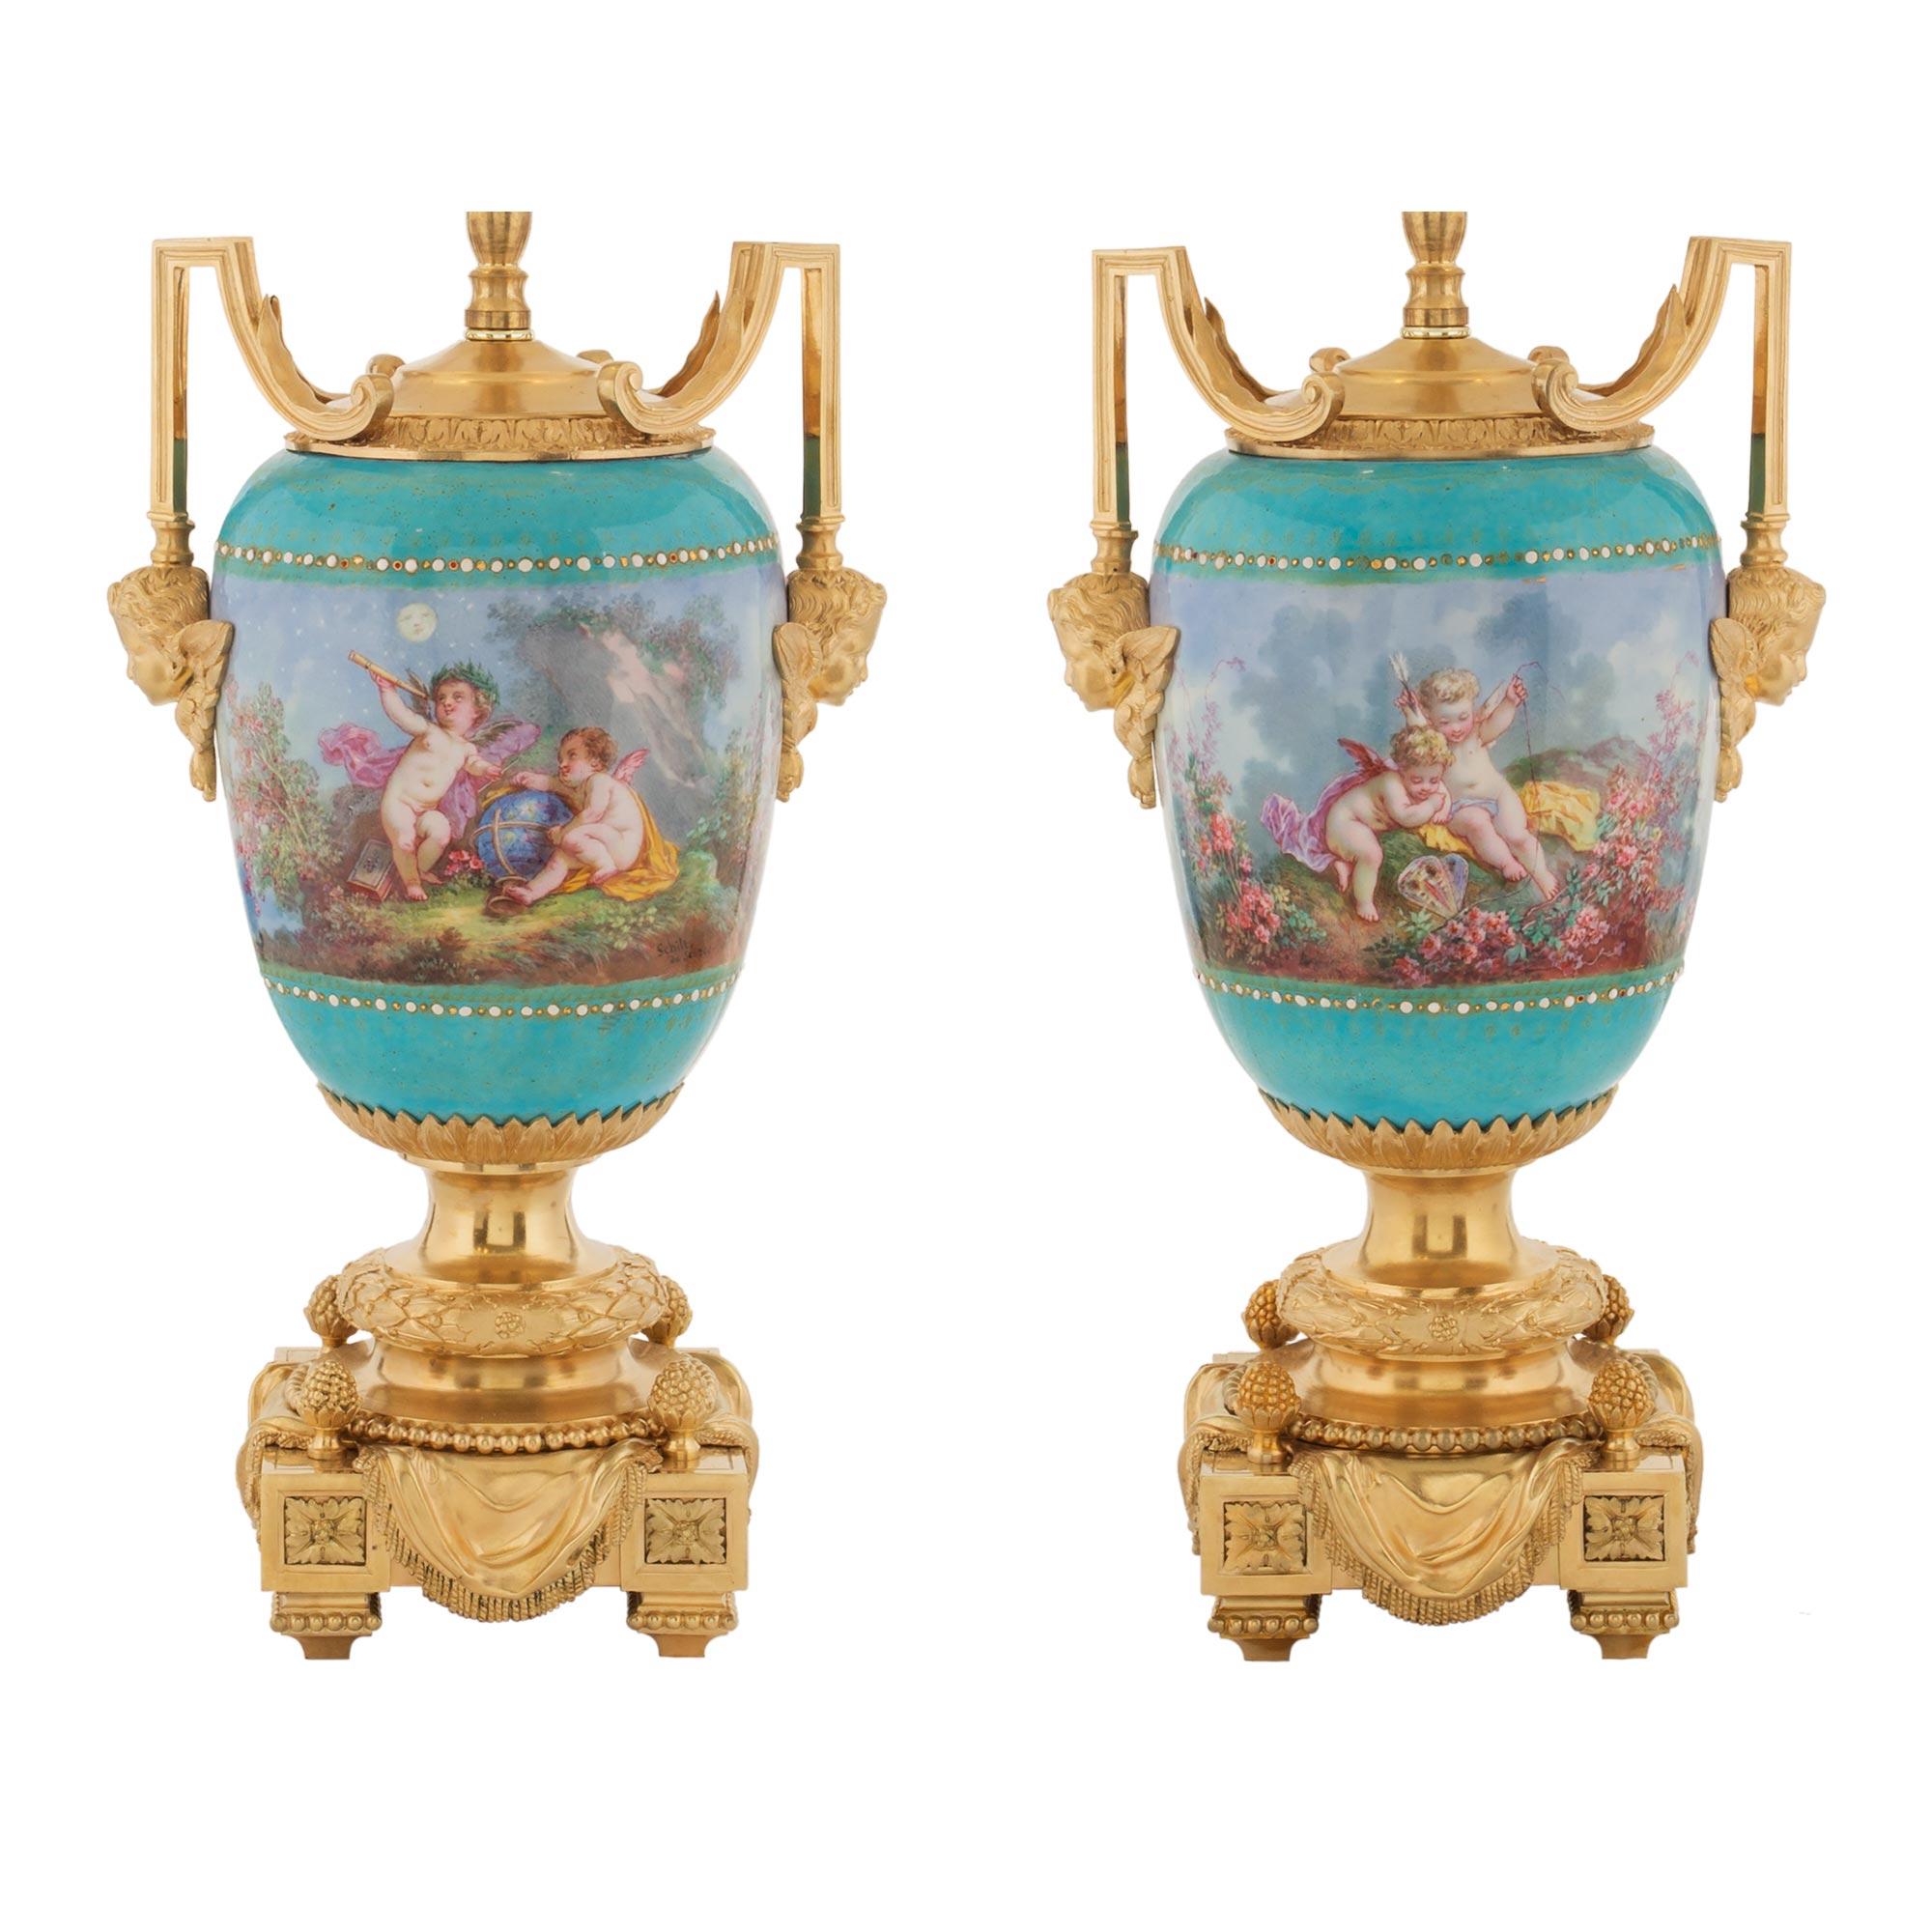 Pair of French 19th Century Louis XVI Style Ormolu and Porcelain Lamps by Picard For Sale 1